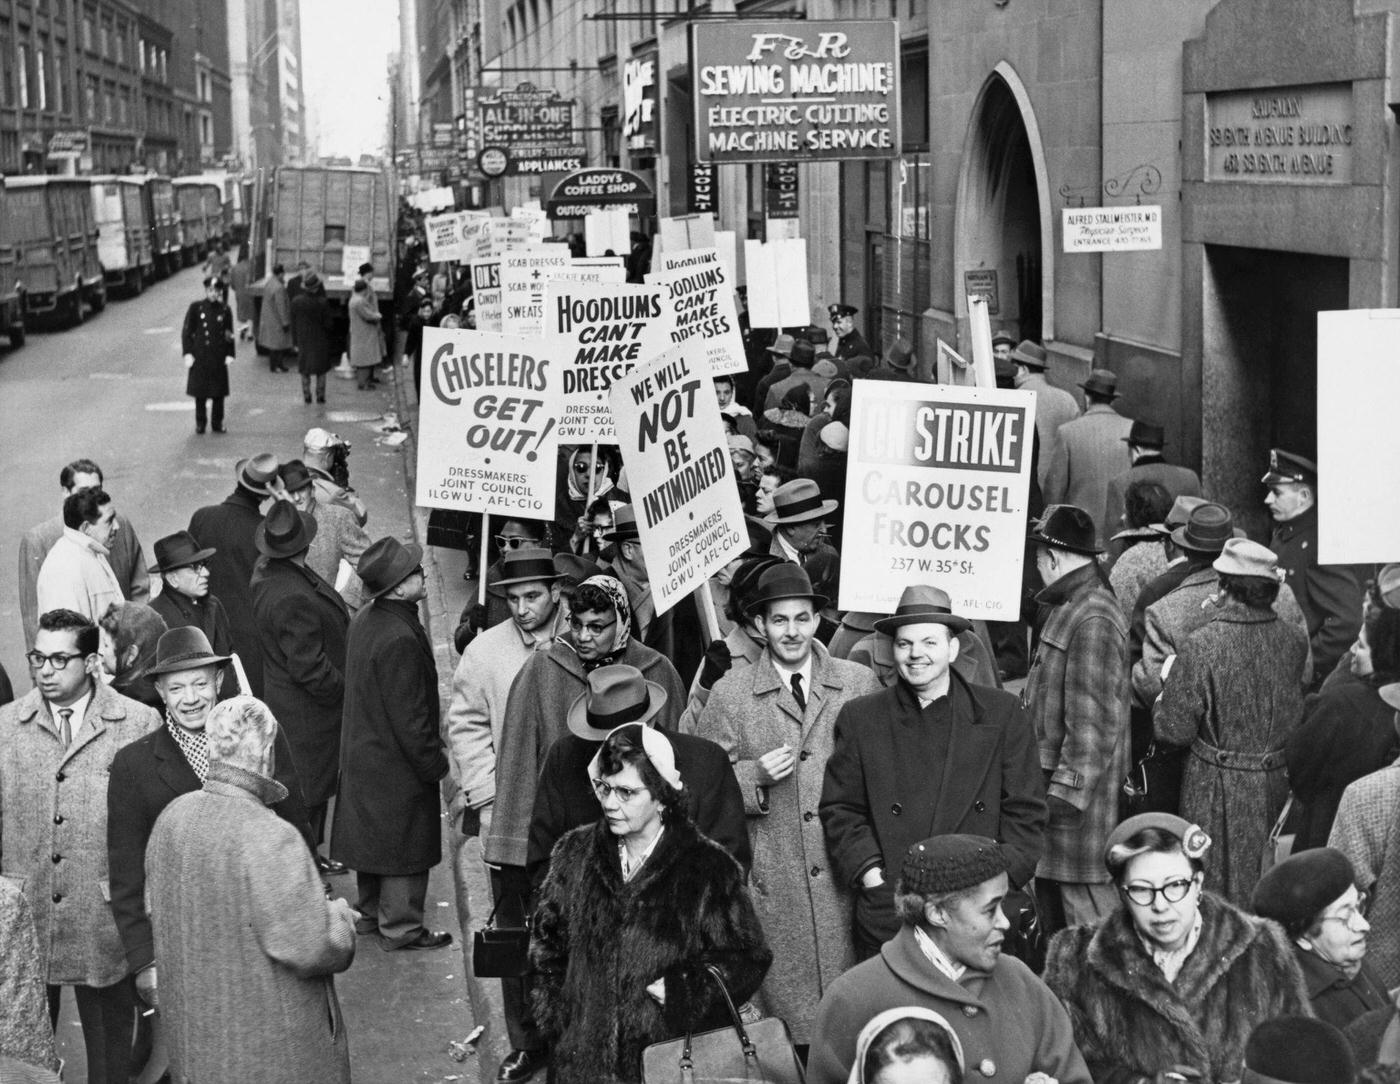 Ilgwu Members Protest, Nyc: International Ladies Garment Workers Union Protest On 35Th Street In The Garment District, Manhattan, 1959.